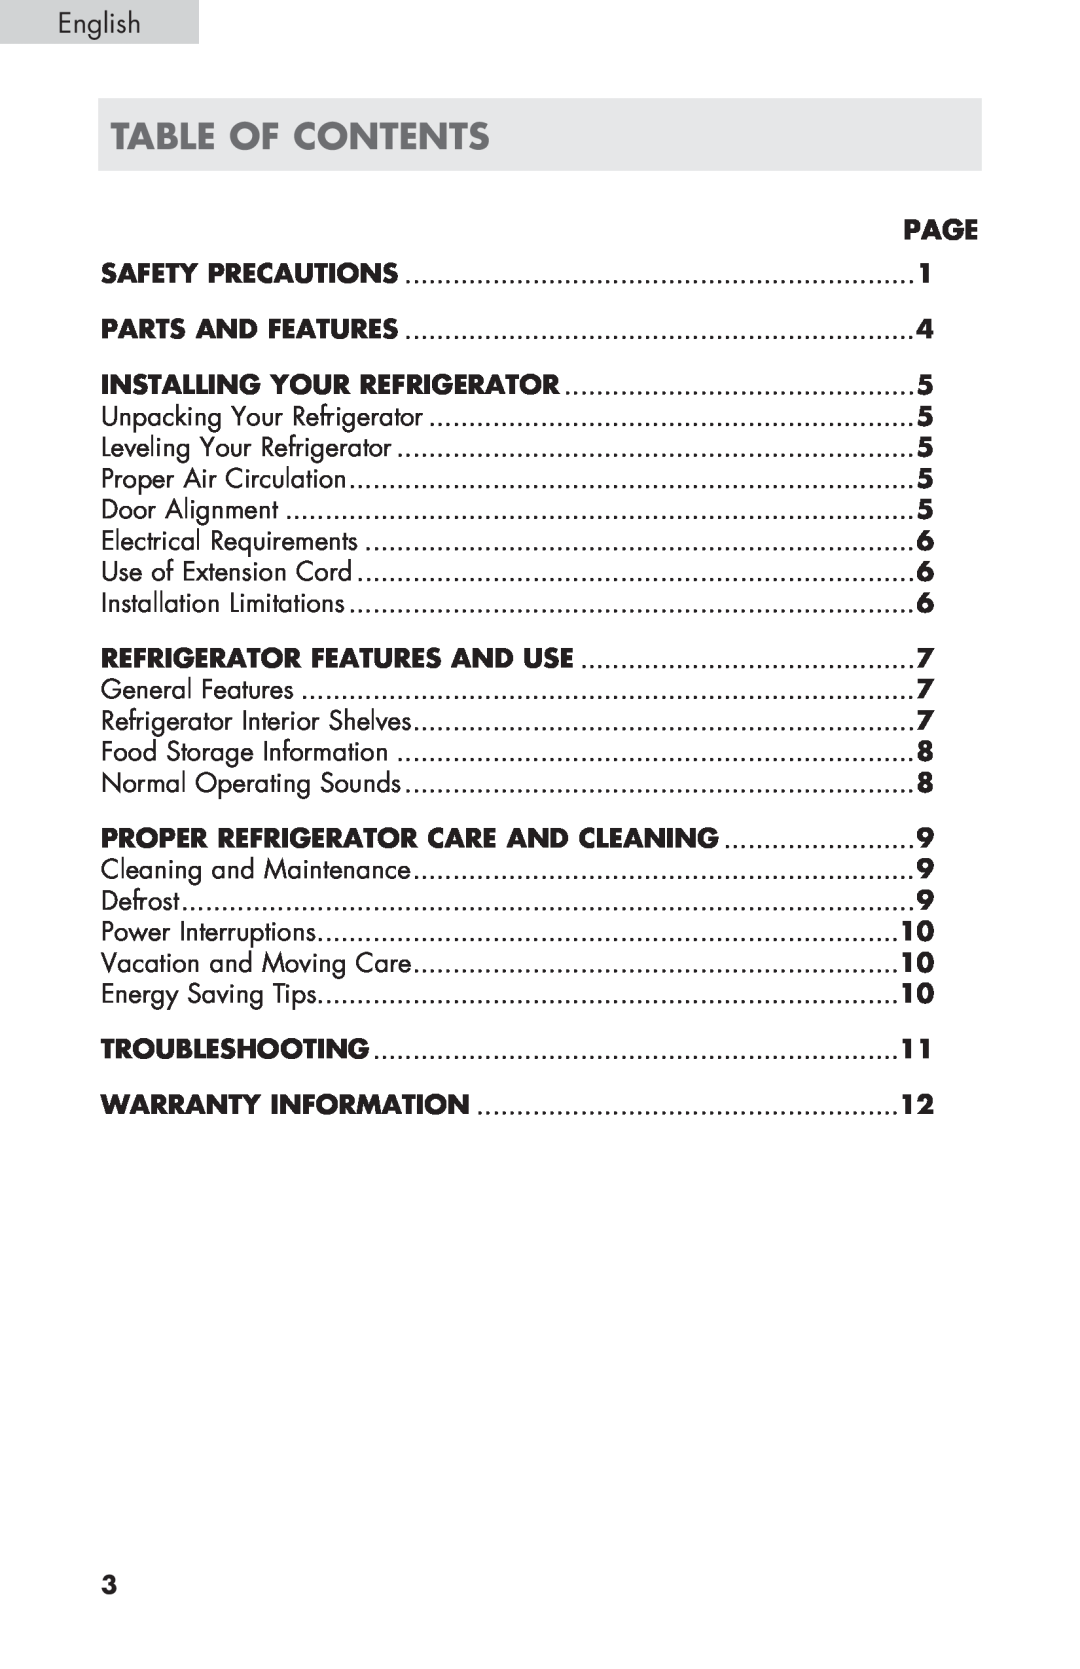 Haier ECR27B Table of contents, English, Page, Safety Precautions, Parts And Features, Installing Your Refrigerator 